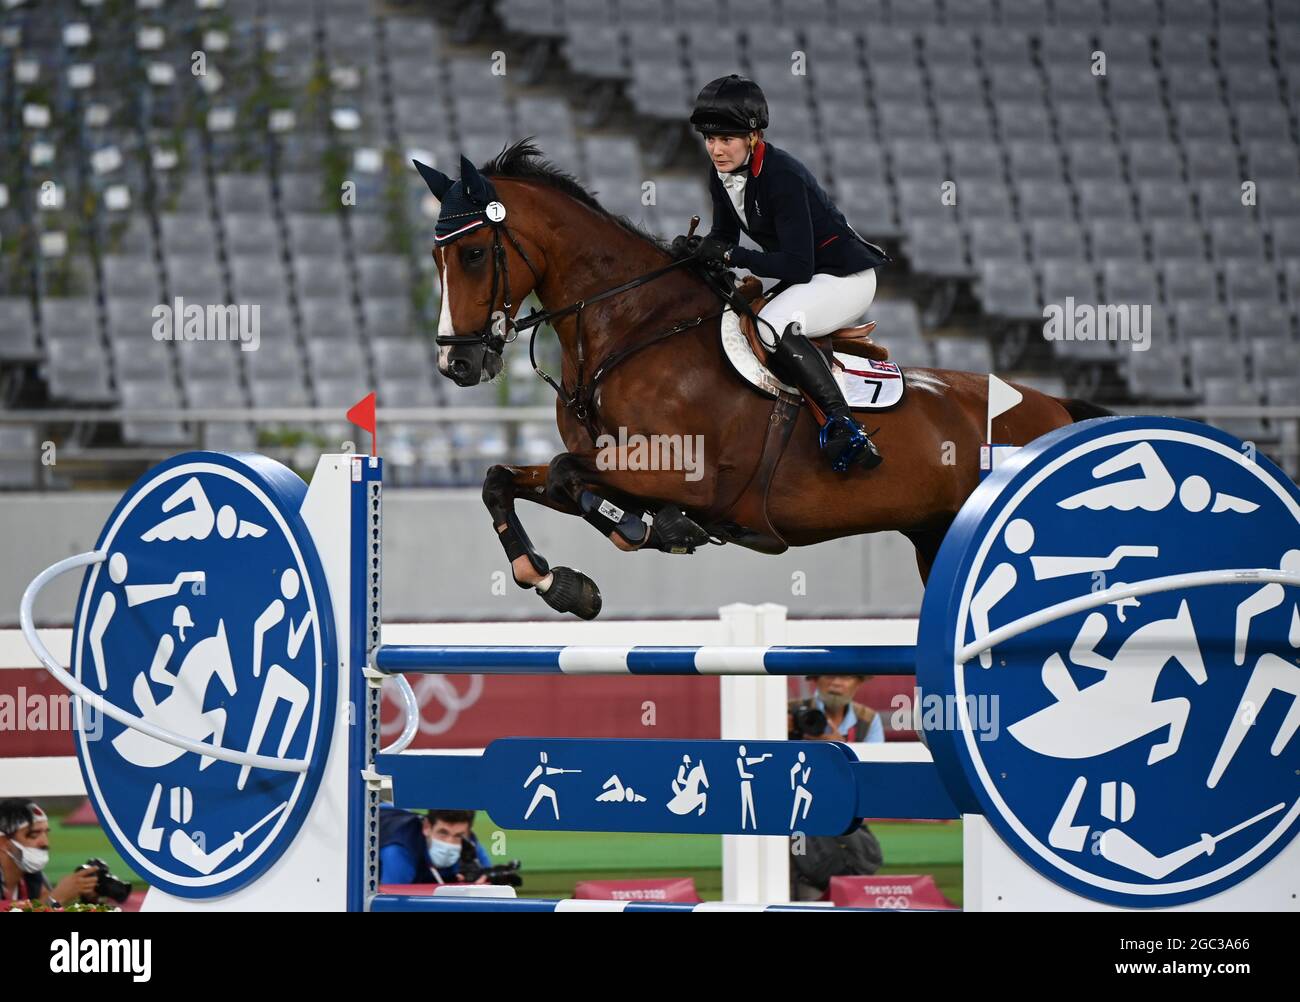 Tokyo, Japan. 6th Aug, 2021. Kate French of Britain competes in the riding portion of the women's individual of modern pentathlon at Tokyo 2020 Olympic Games, in Tokyo, Japan, Aug. 6, 2021. Credit: Dai Tianfang/Xinhua/Alamy Live News Stock Photo